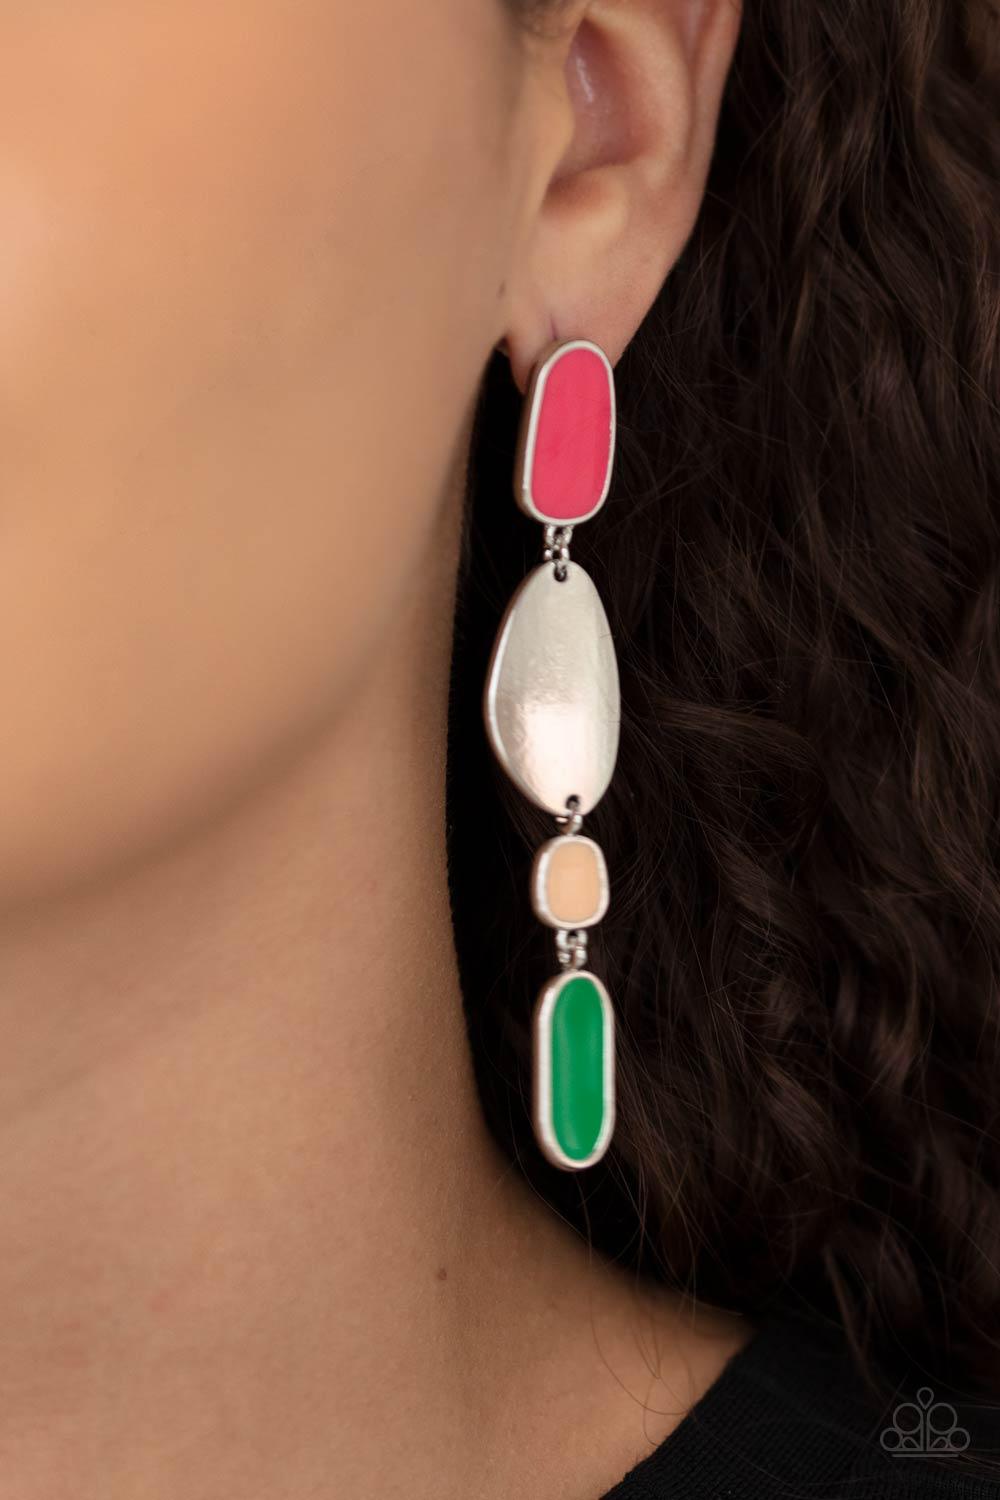 Paparazzi Accessories Deco By Design - Multi Painted in shiny Raspberry Sorbet, Desert Mist, and Mint finishes, a collection of asymmetrical frames link with a glistening silver frame, creating an abstract lure. Earring attaches to a standard post fitting